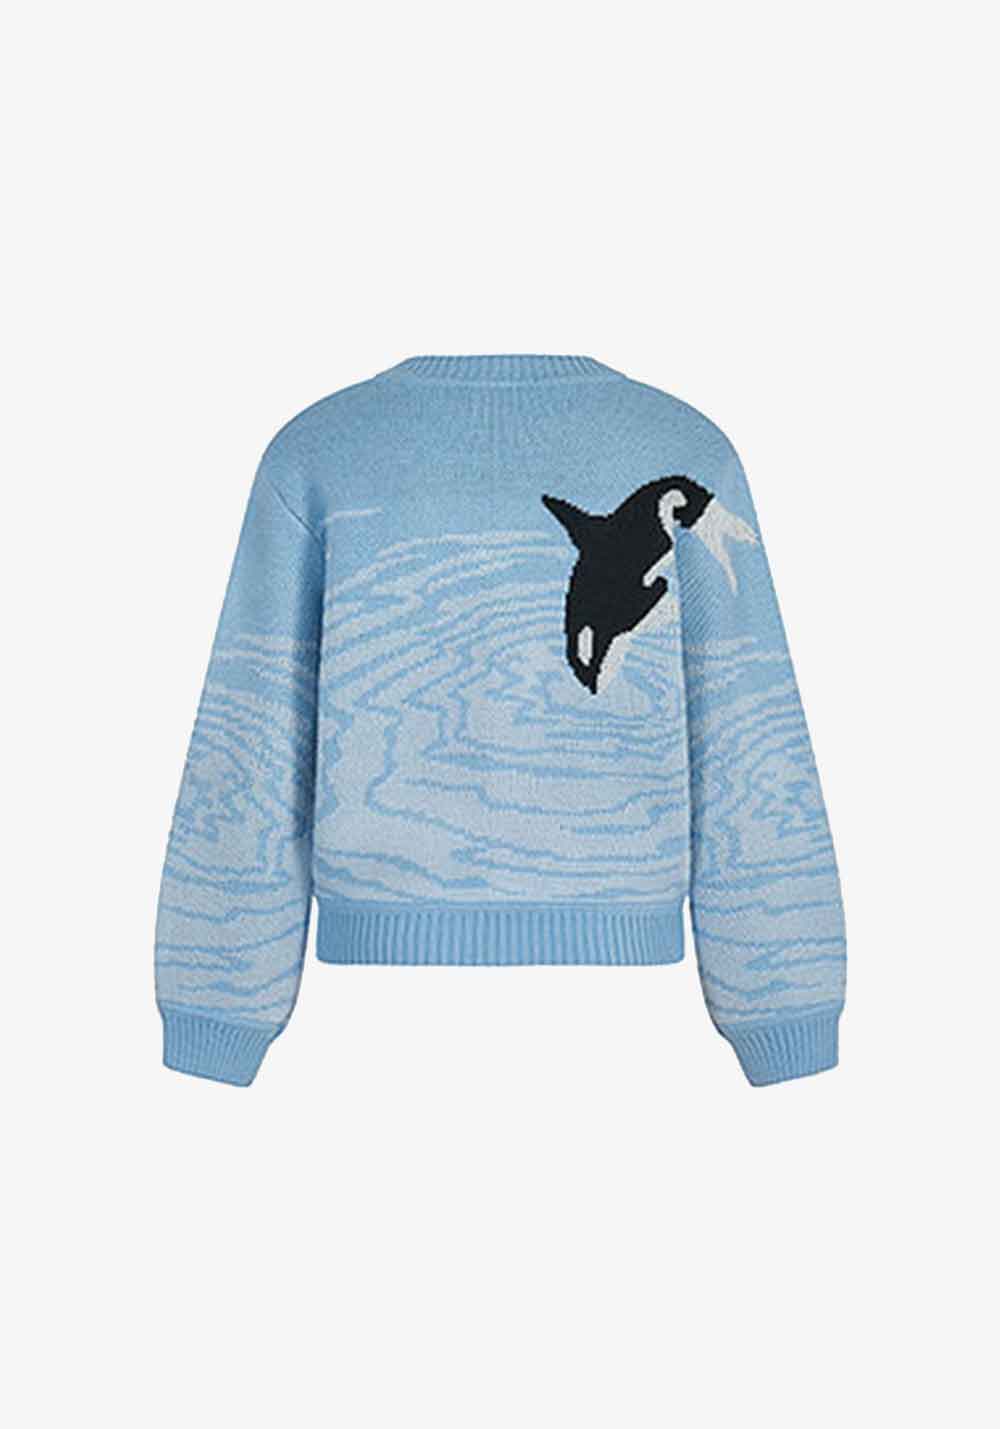 THE WILLY EXCLUSIVE JUMPER